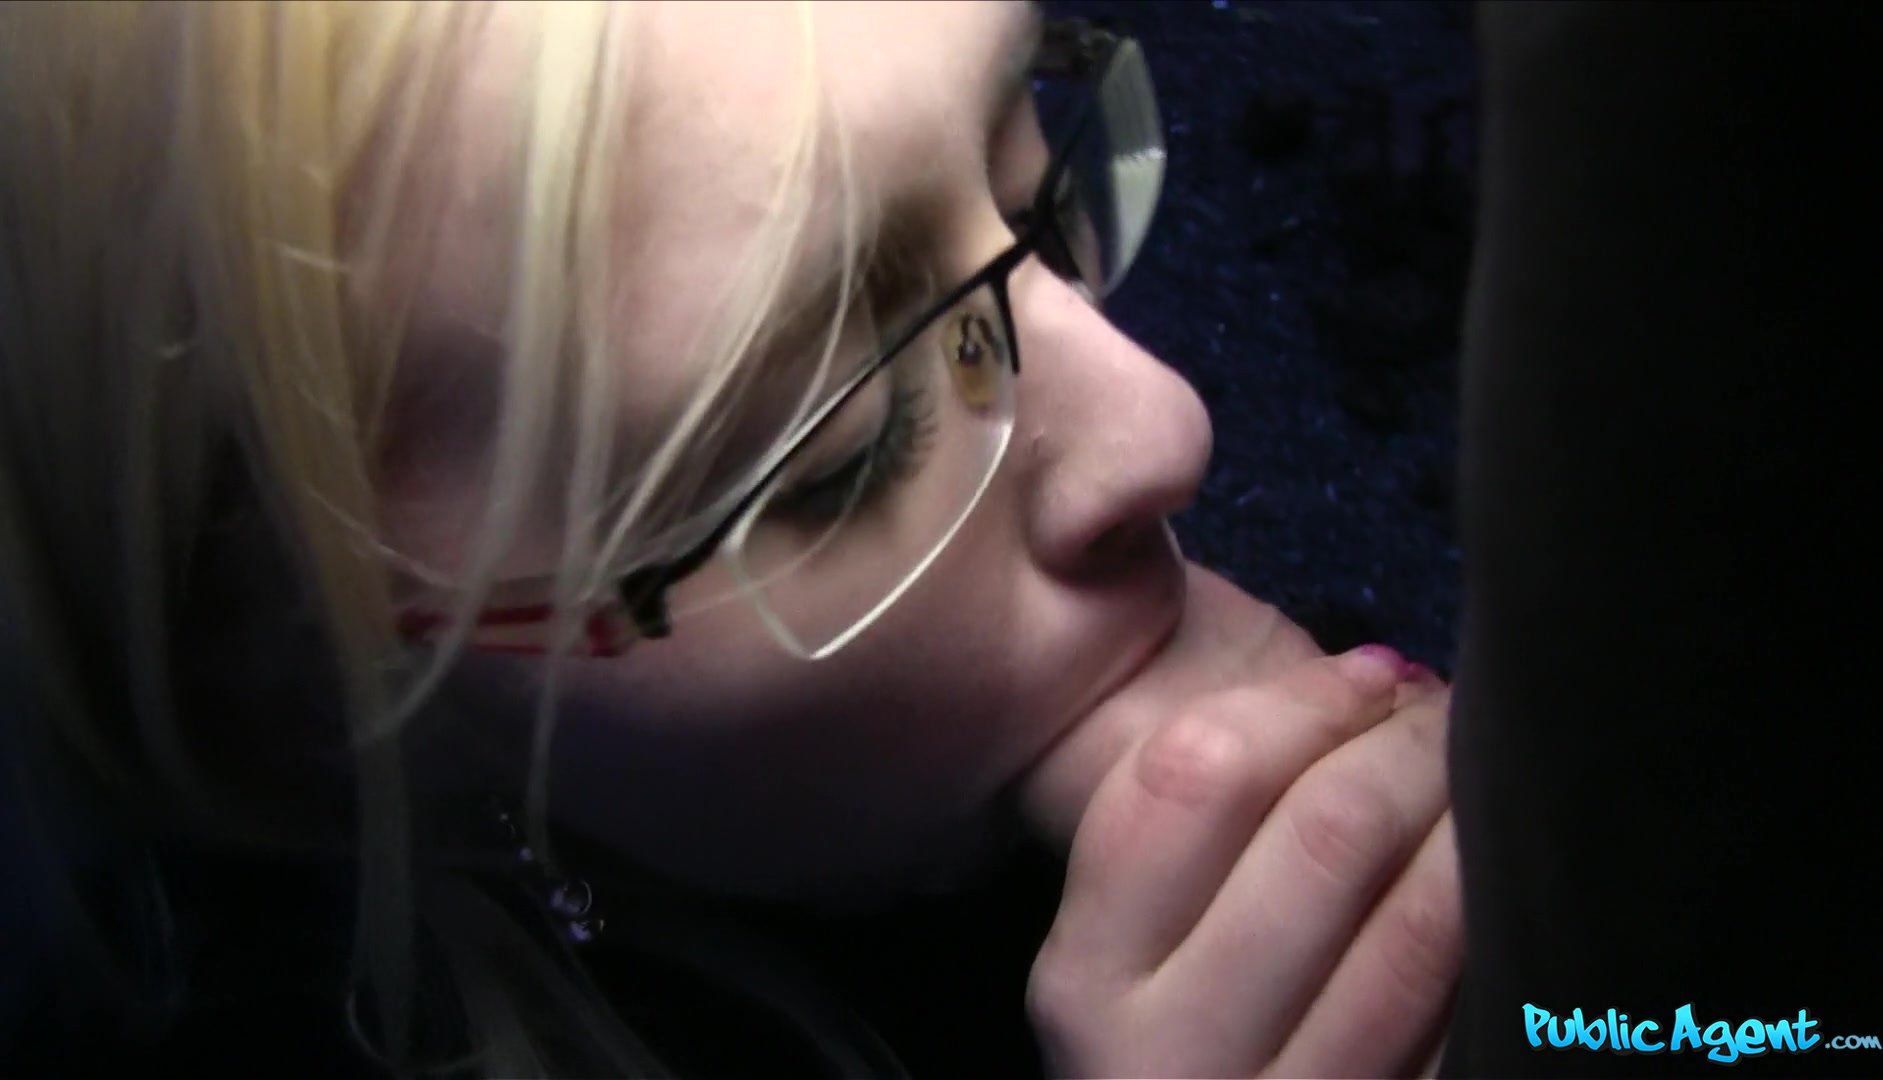 Humiliation Pov Public Agent - Large Blondie Takes All Of Stranger's Male Pole Deep Inside Her Slit 2 - Emily Sweet Full